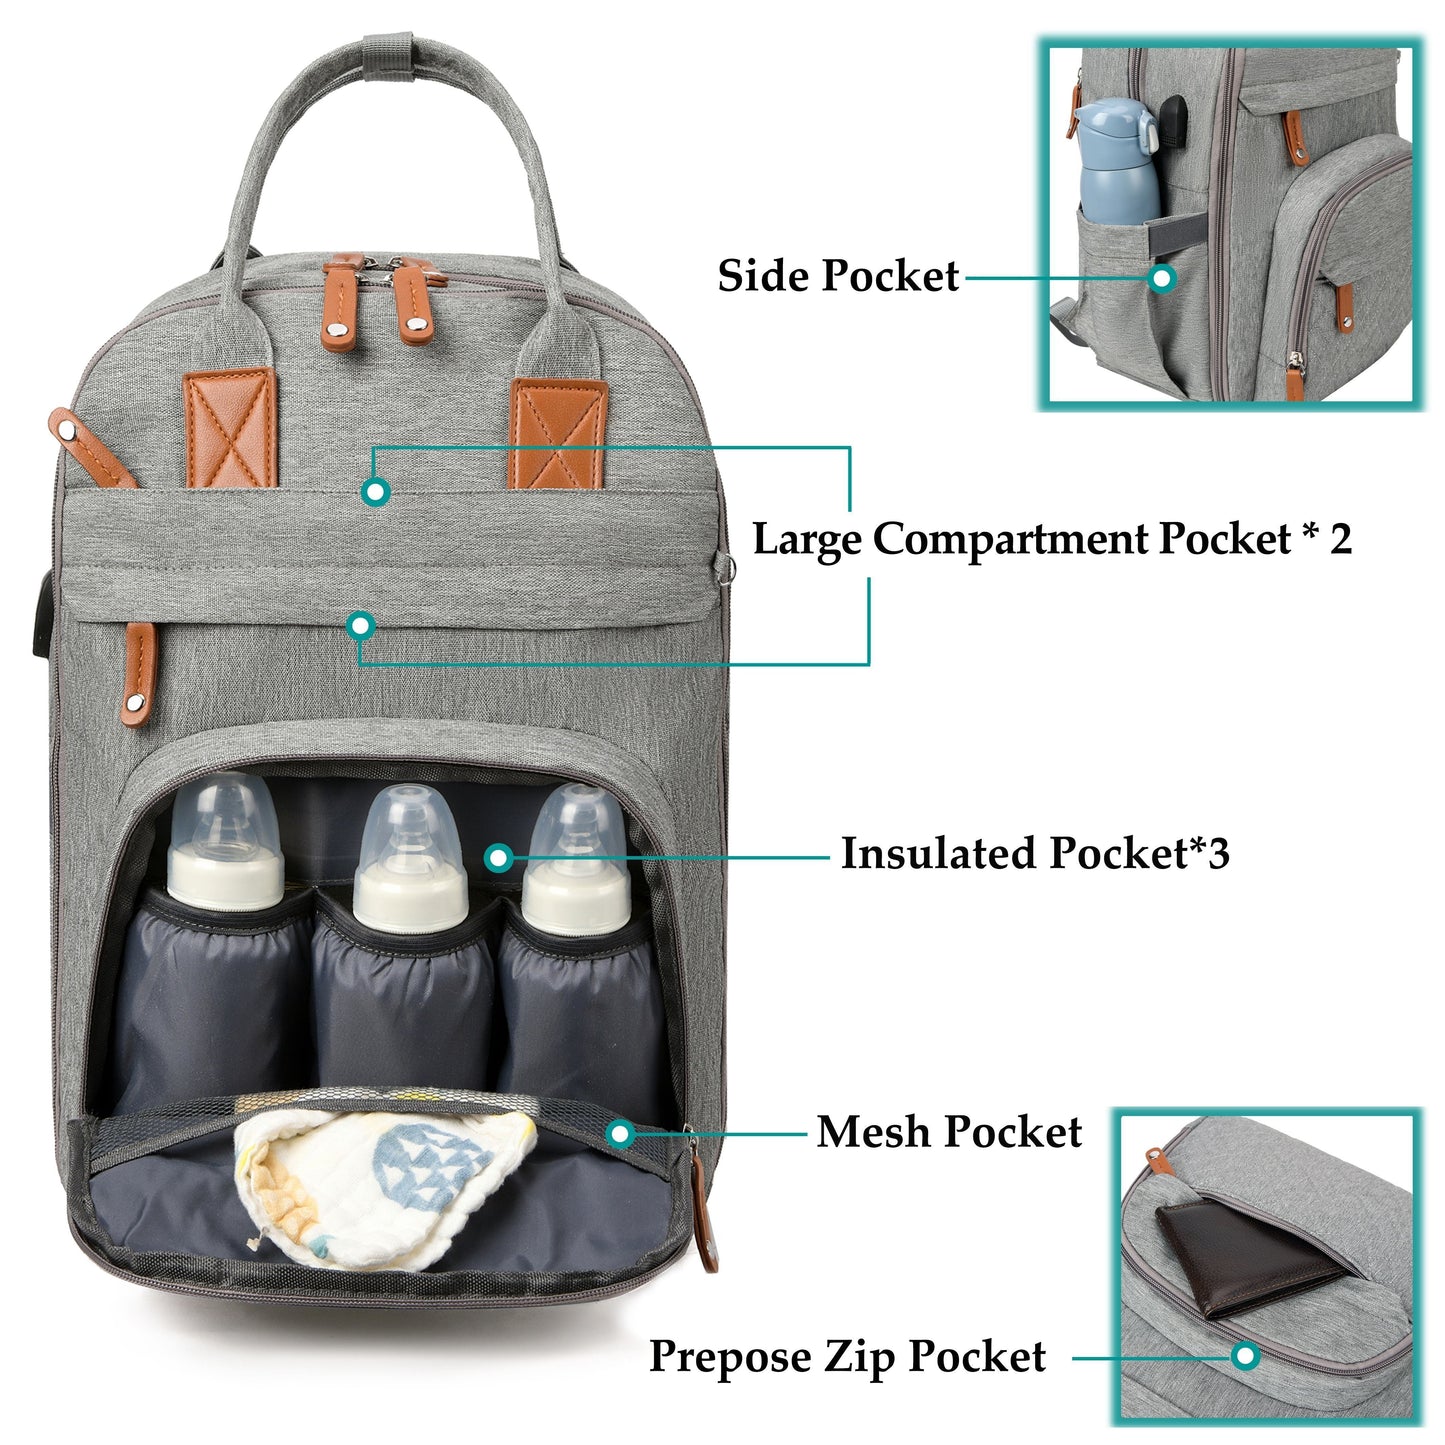 Lamroro Diaper Backpack - Spacious, Water-Resistant, Multifunctional Travel Bag with Stroller Straps, Pacifier Case, Utility Pocket, and Soft Shell - Perfect for Newborn Essentials, Baby Registry, and Shower Gifts